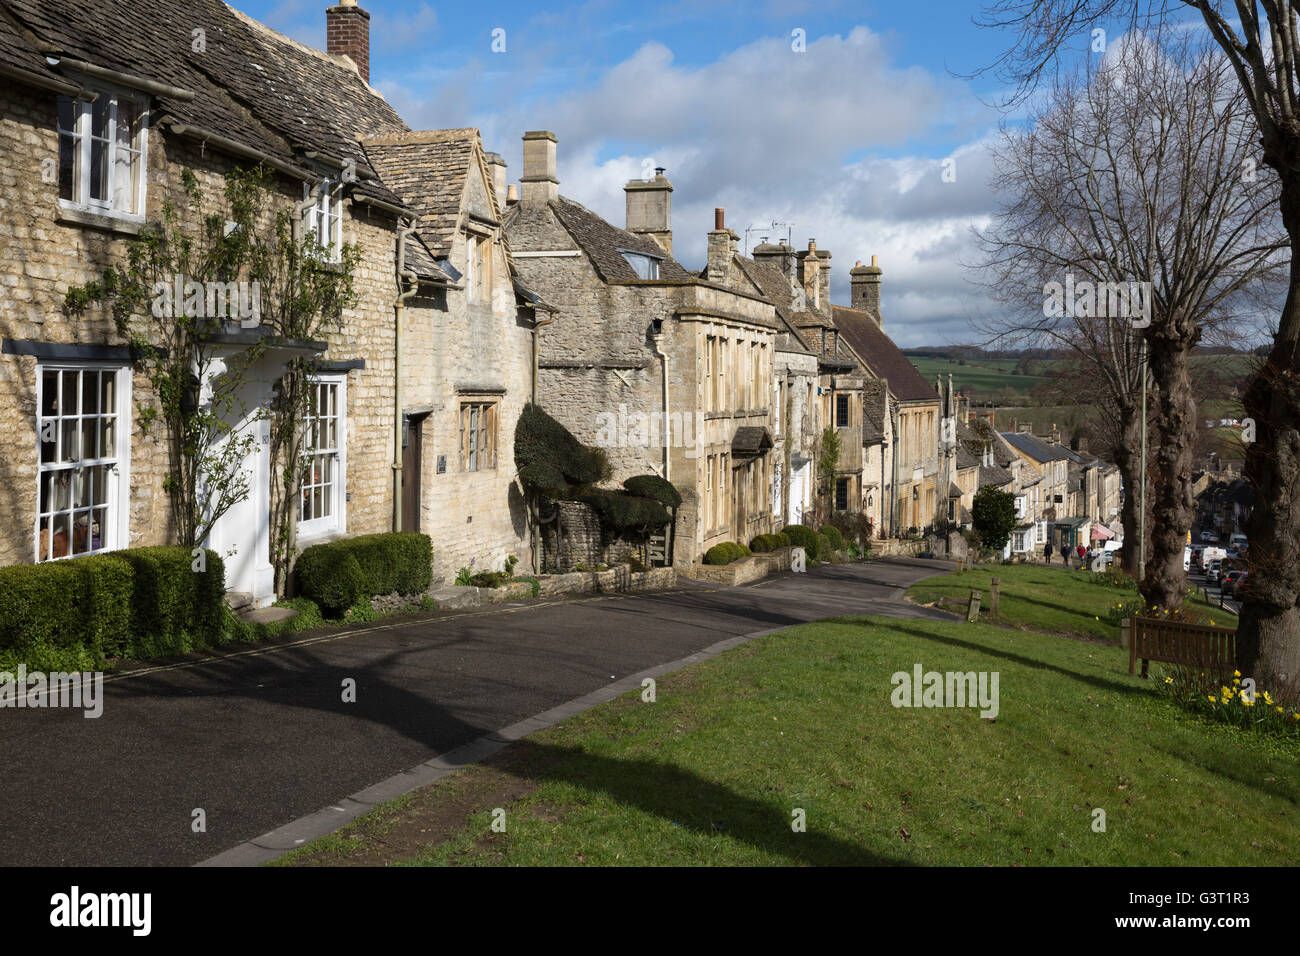 Cotswold stone cottages along The Hill, Burford, Cotswolds, Oxfordshire, England, United Kingdom, Europe Stock Photo